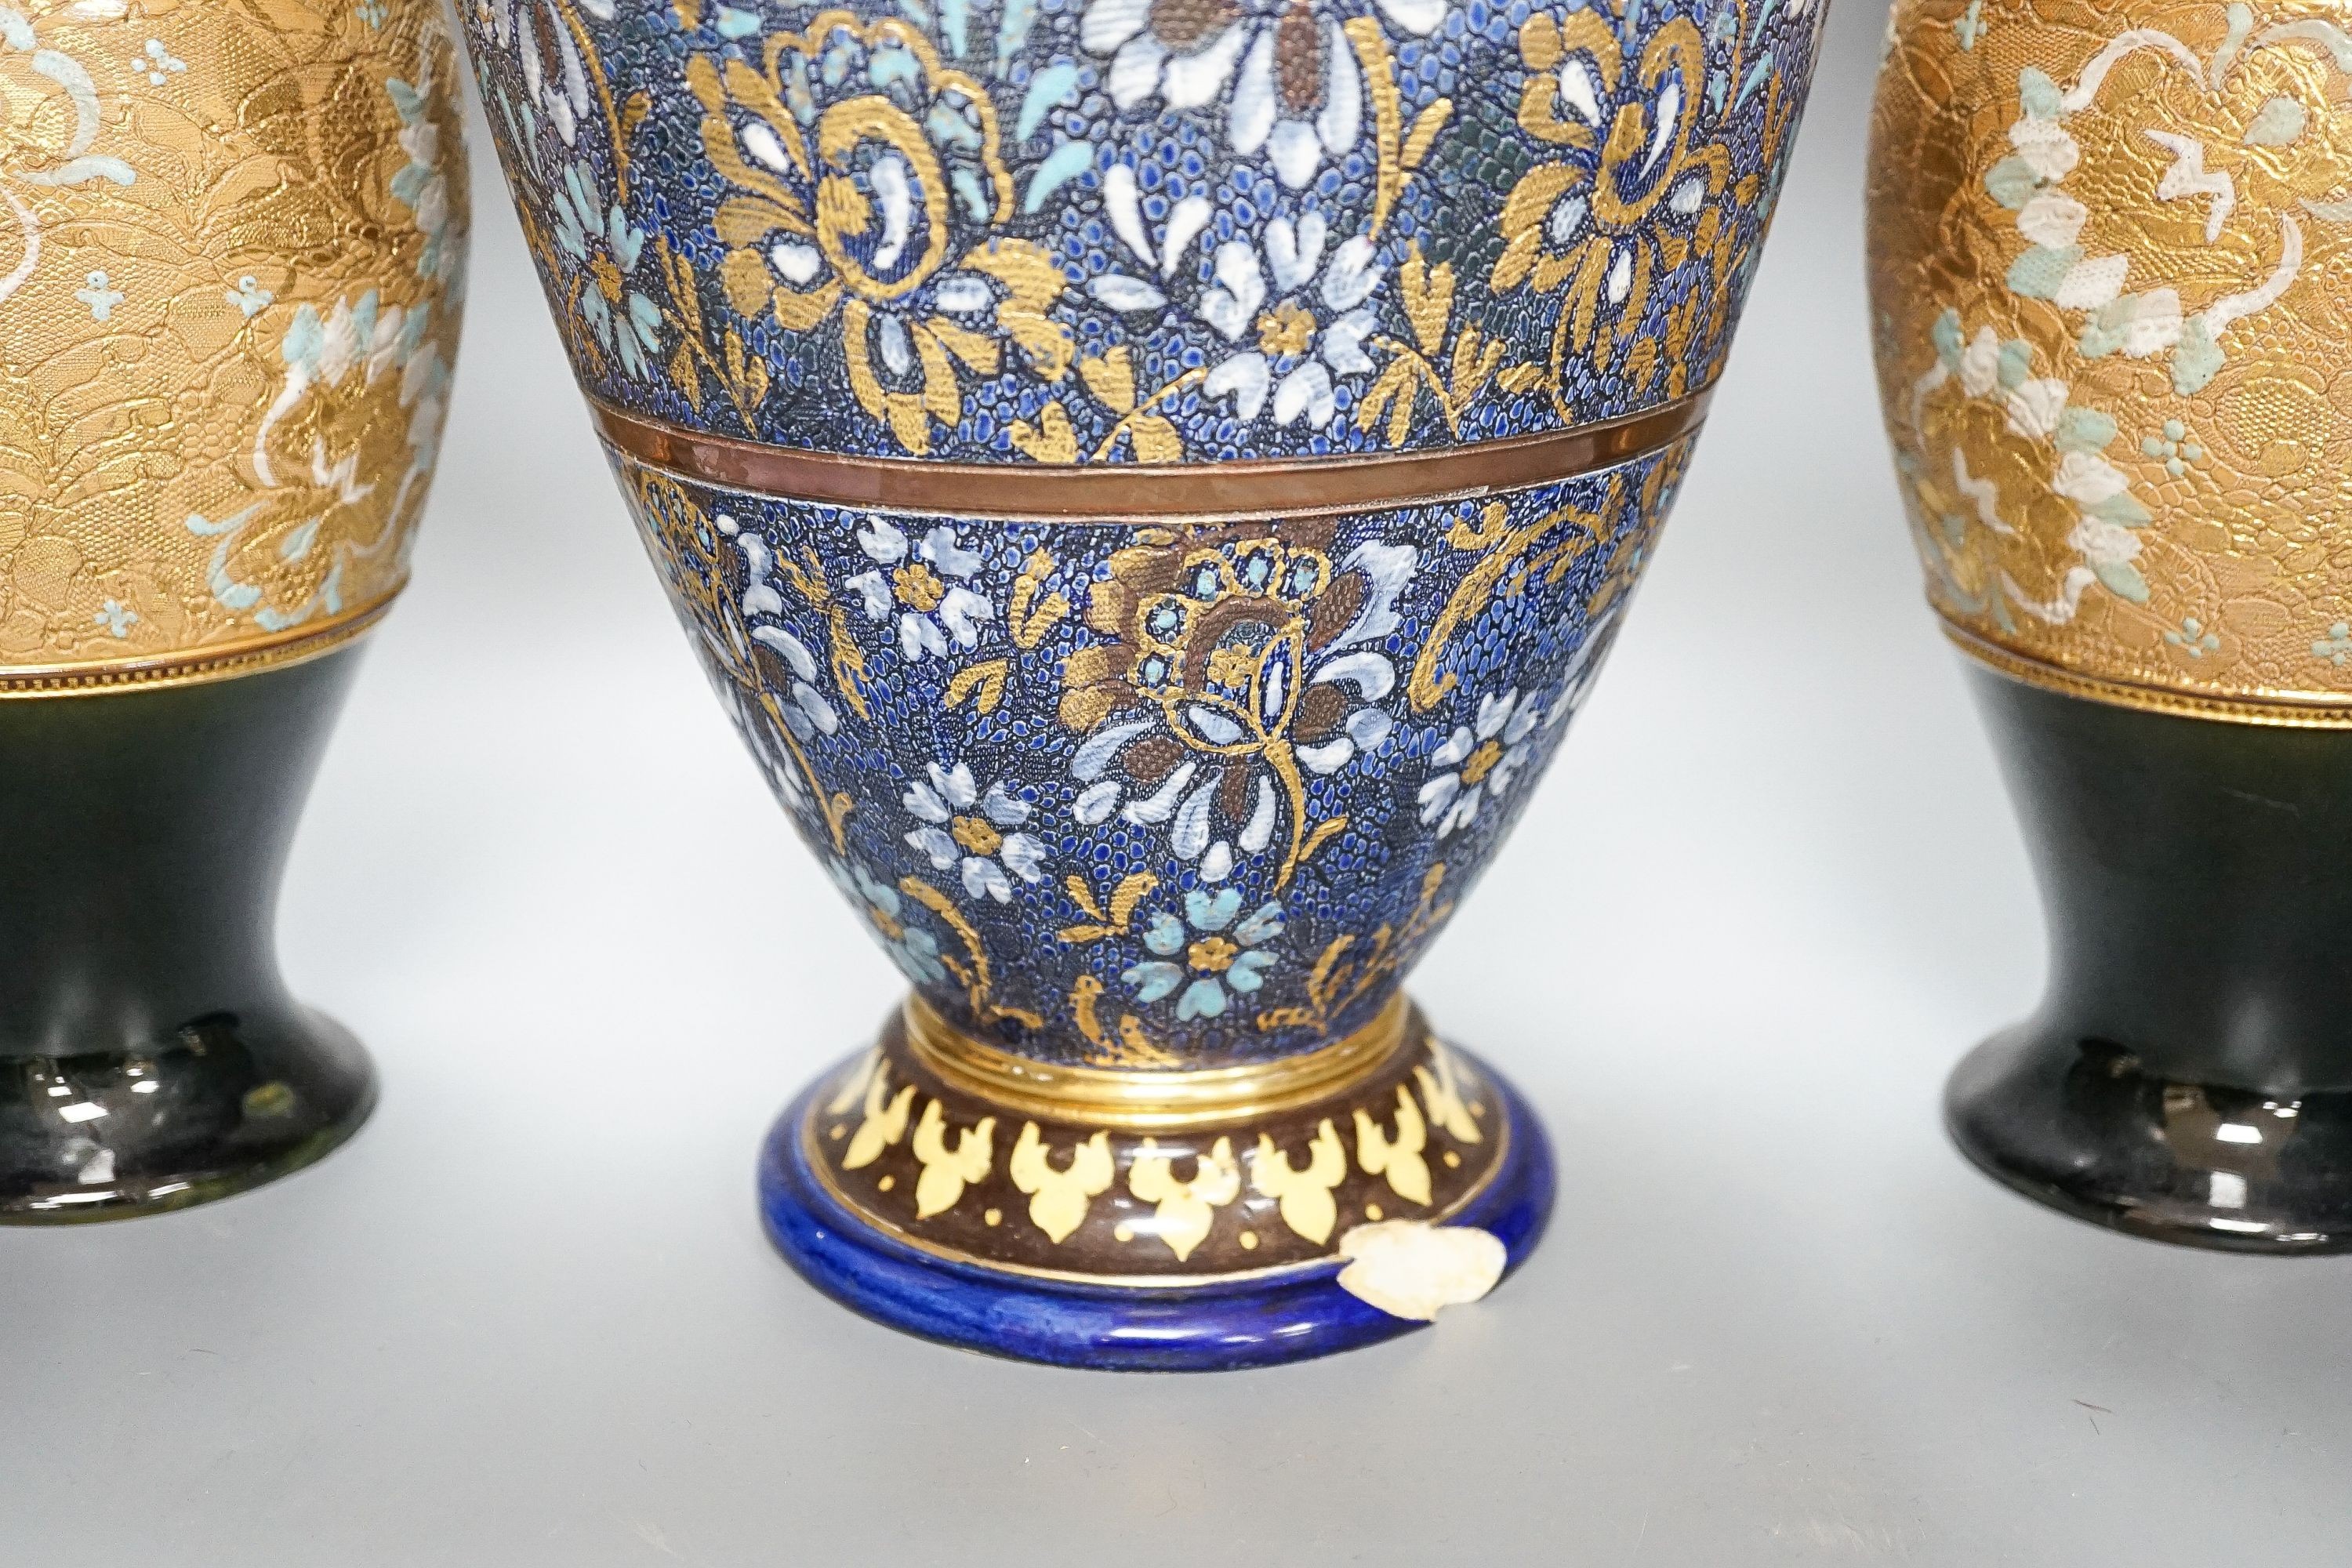 A large Doulton Slater's Patent vase, 46cm and a pair of similar smaller vases, 34cm